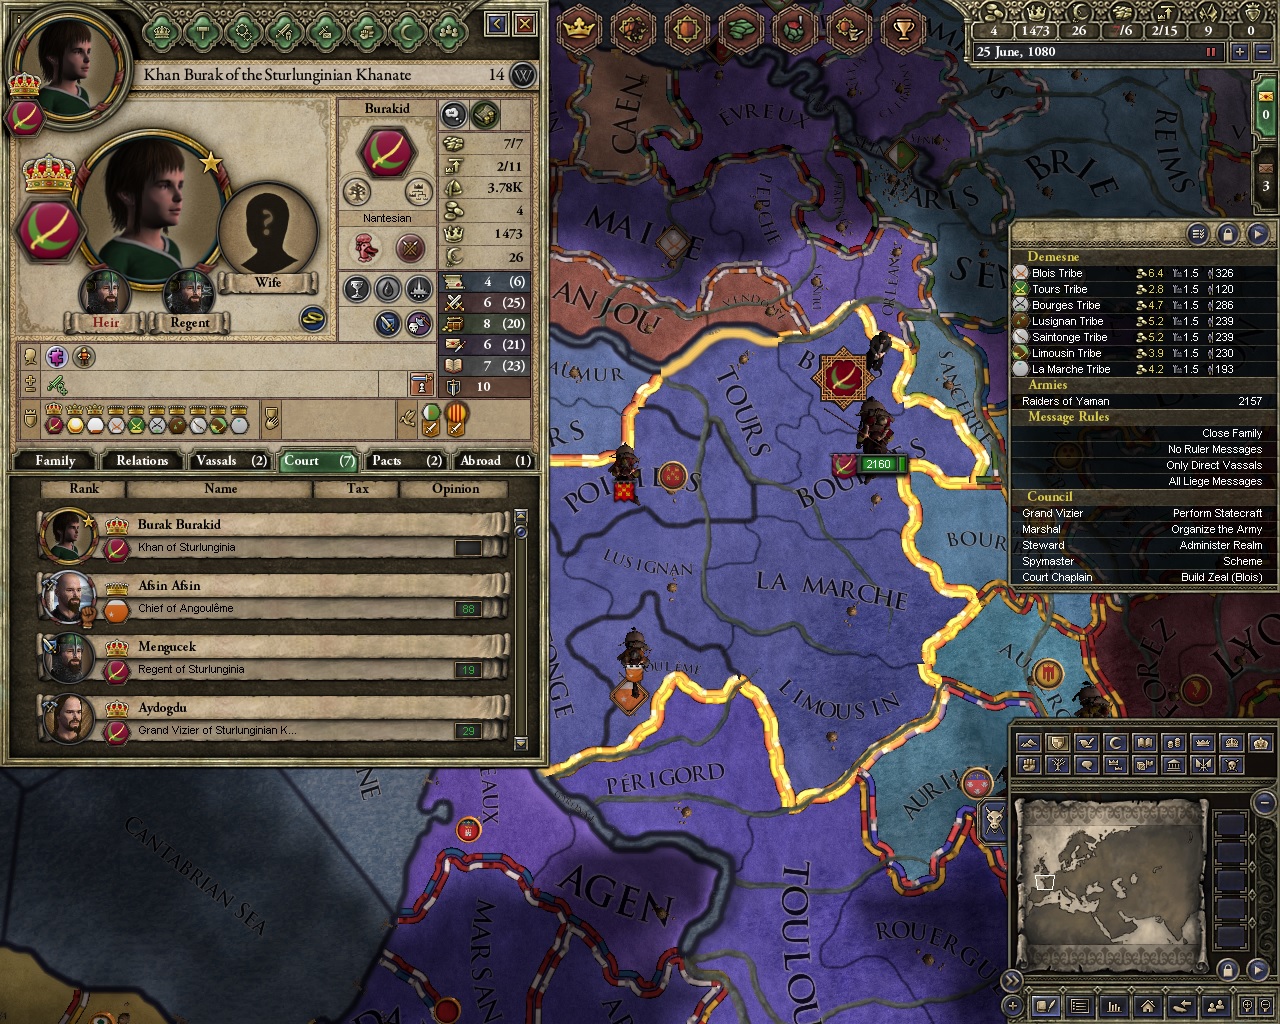 Crusader Kings II - How to Get Rare Achievement - Feeding time! - C4BBBE6